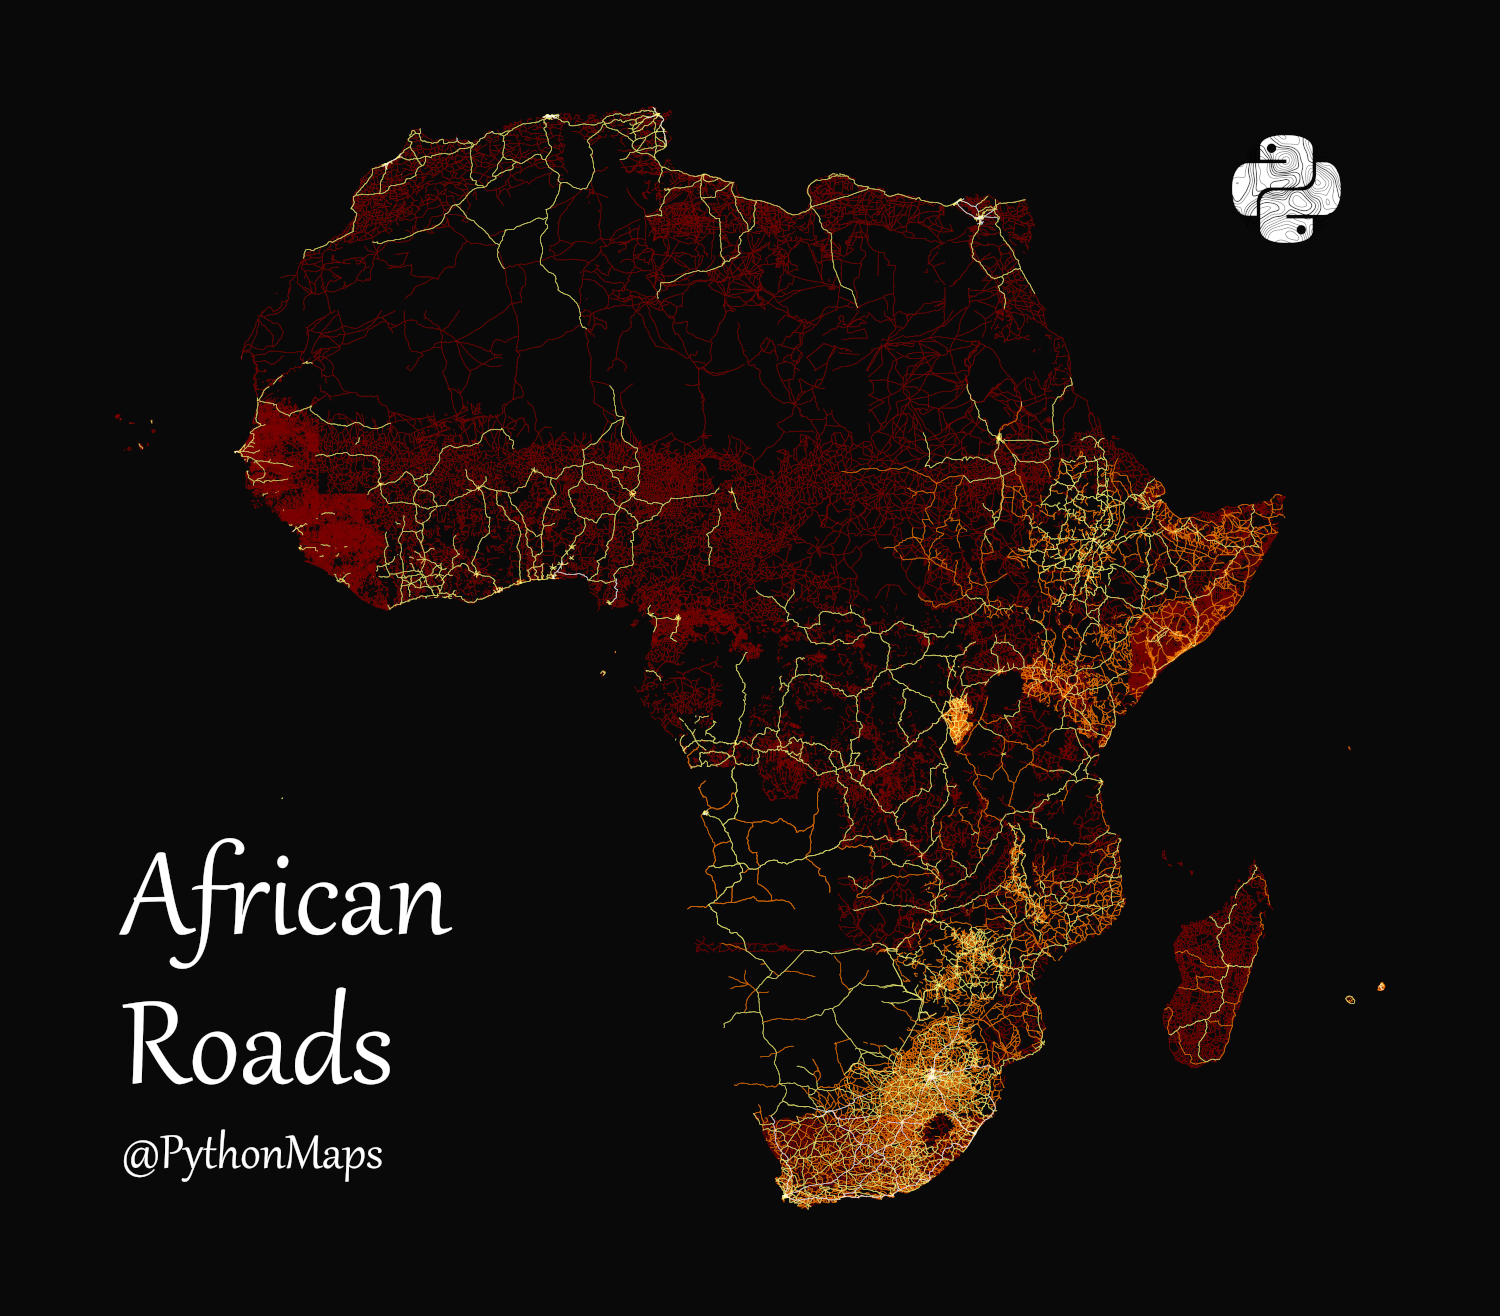 A map of all roads in Africa, visualized by type.